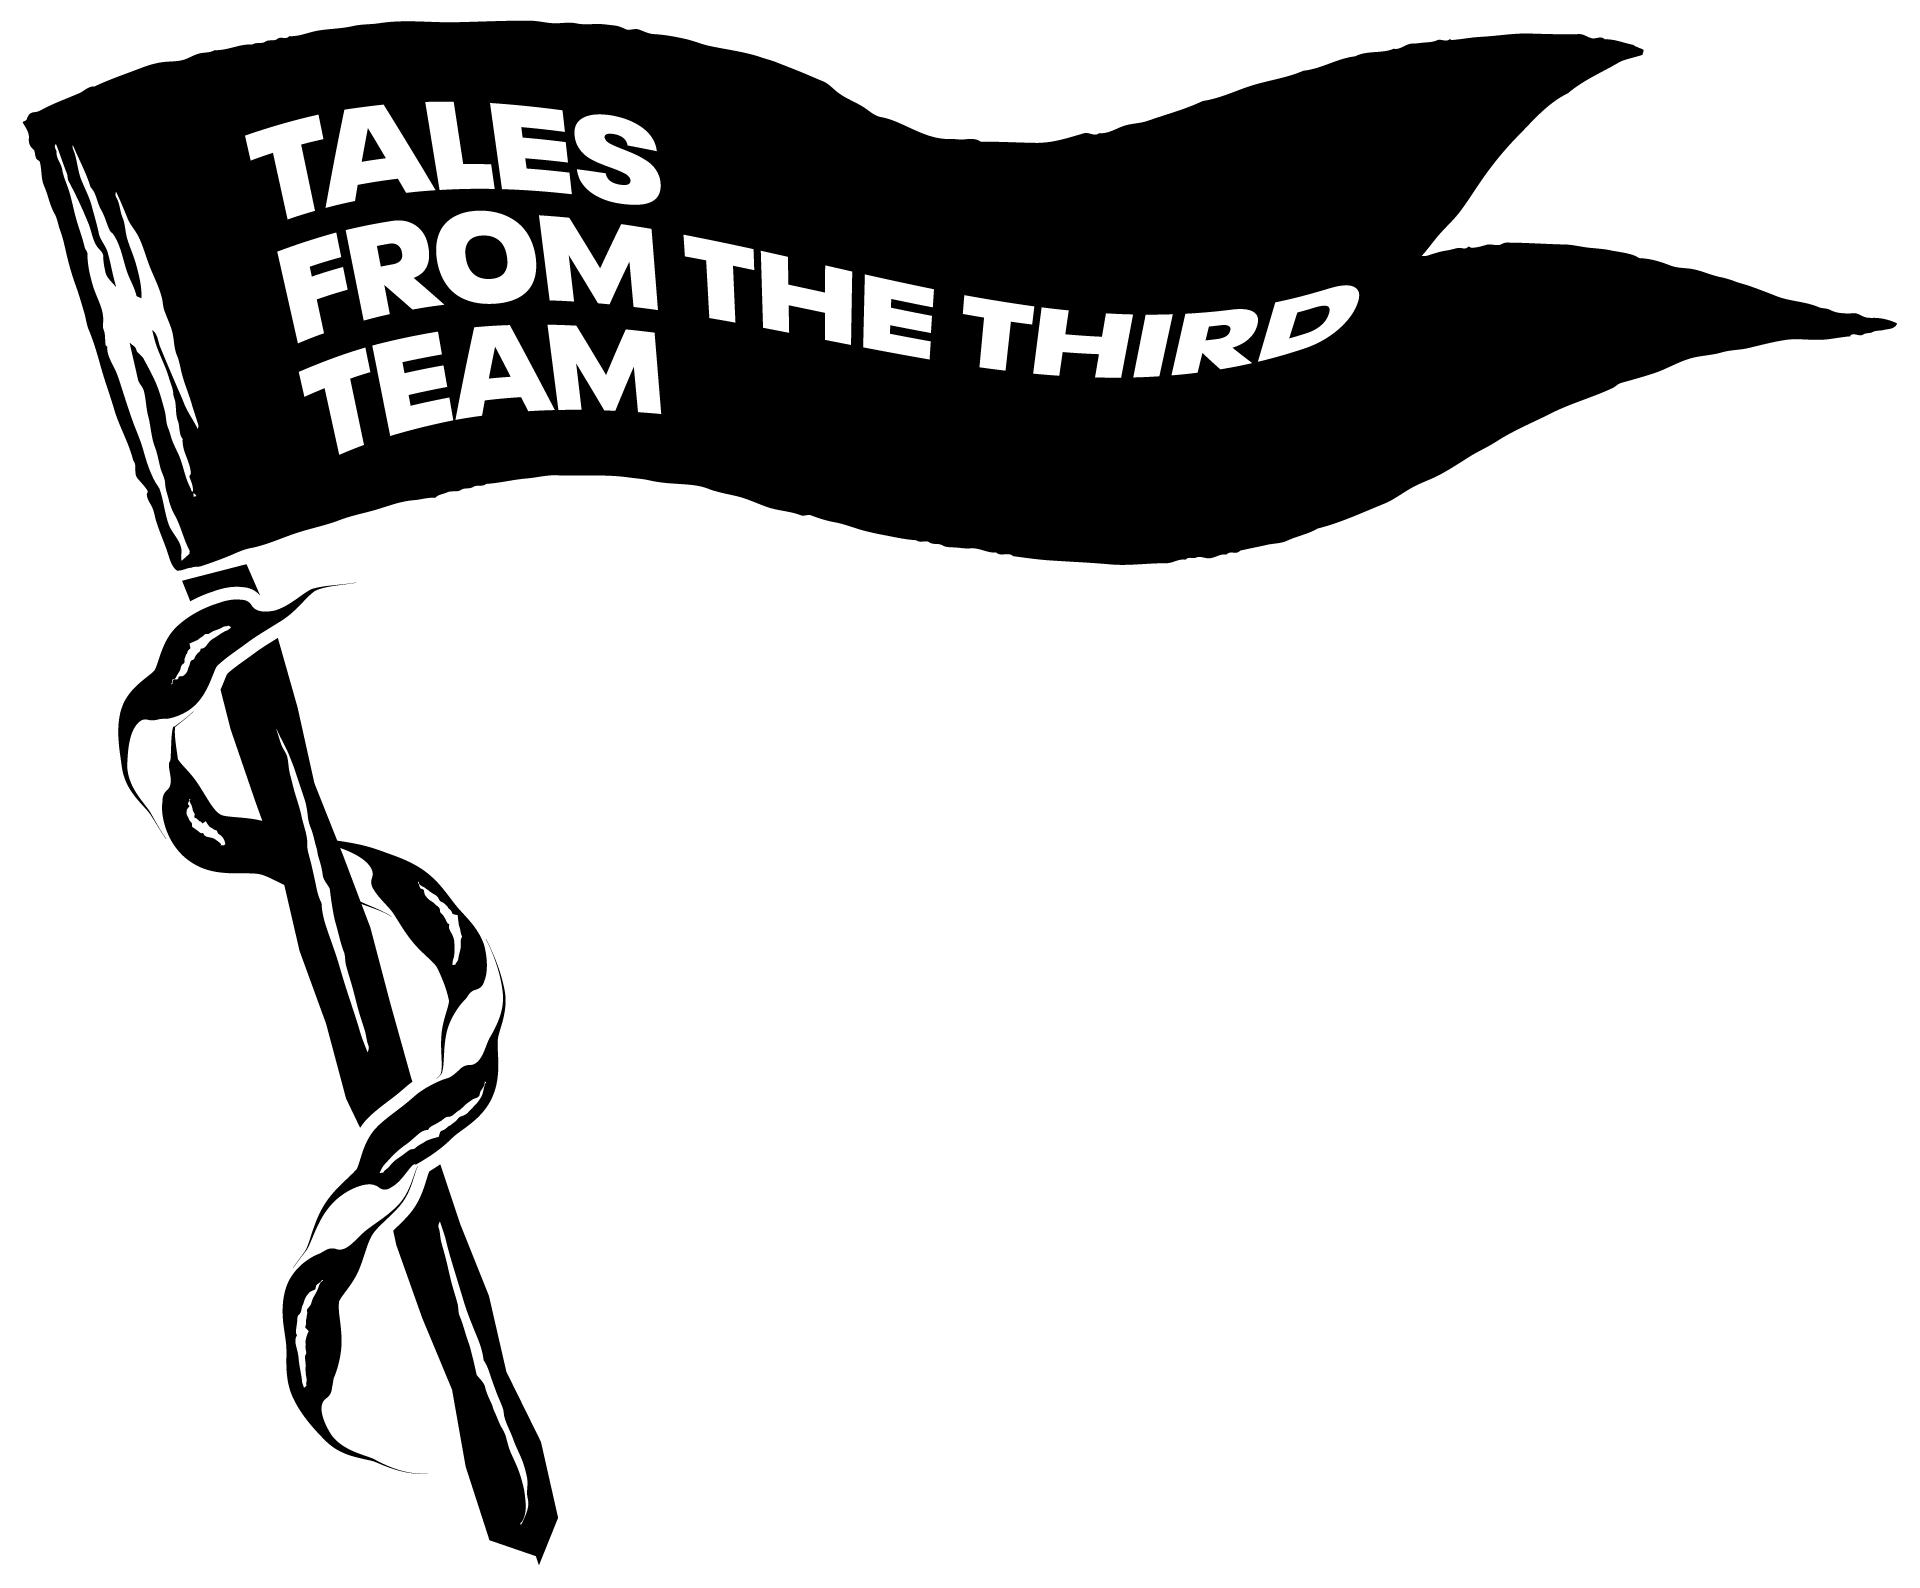 Introducing ... Tales from the Third Team